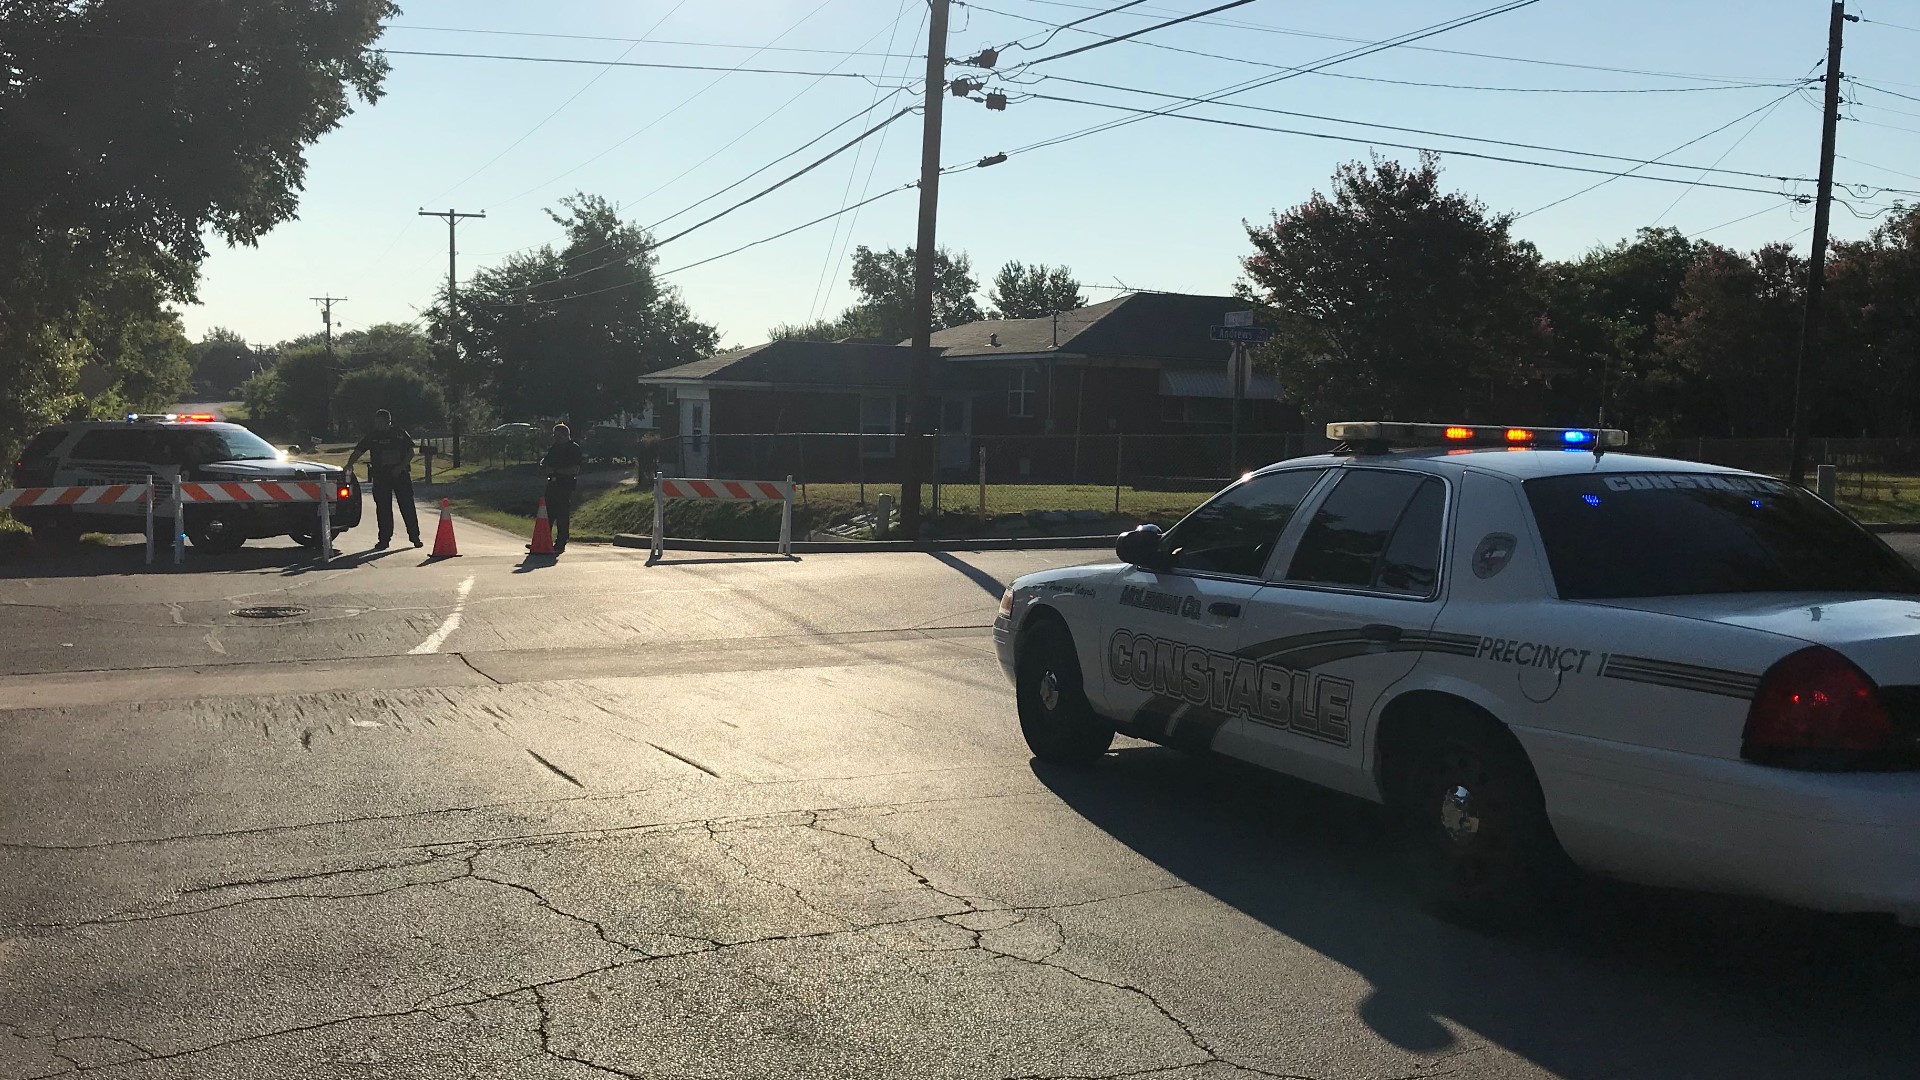 The FBI was "conducting a court-authorized operation" at a home in the area of  East Stegall and South Andrews drives when the standoff began.